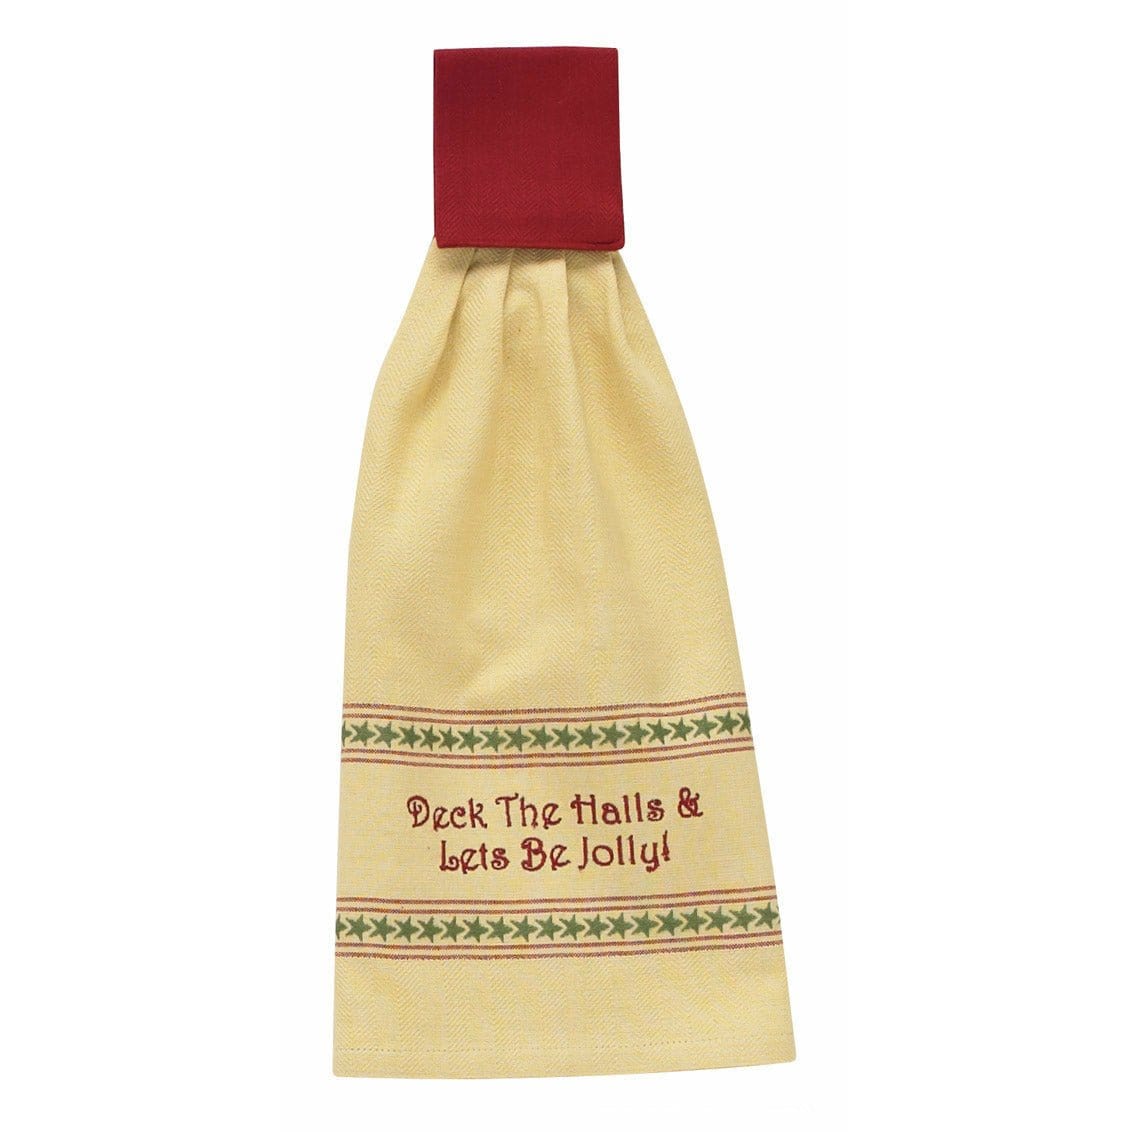 Christmas Past Deck The Halls And Let's Be Jolly Hand Towel-Park Designs-The Village Merchant